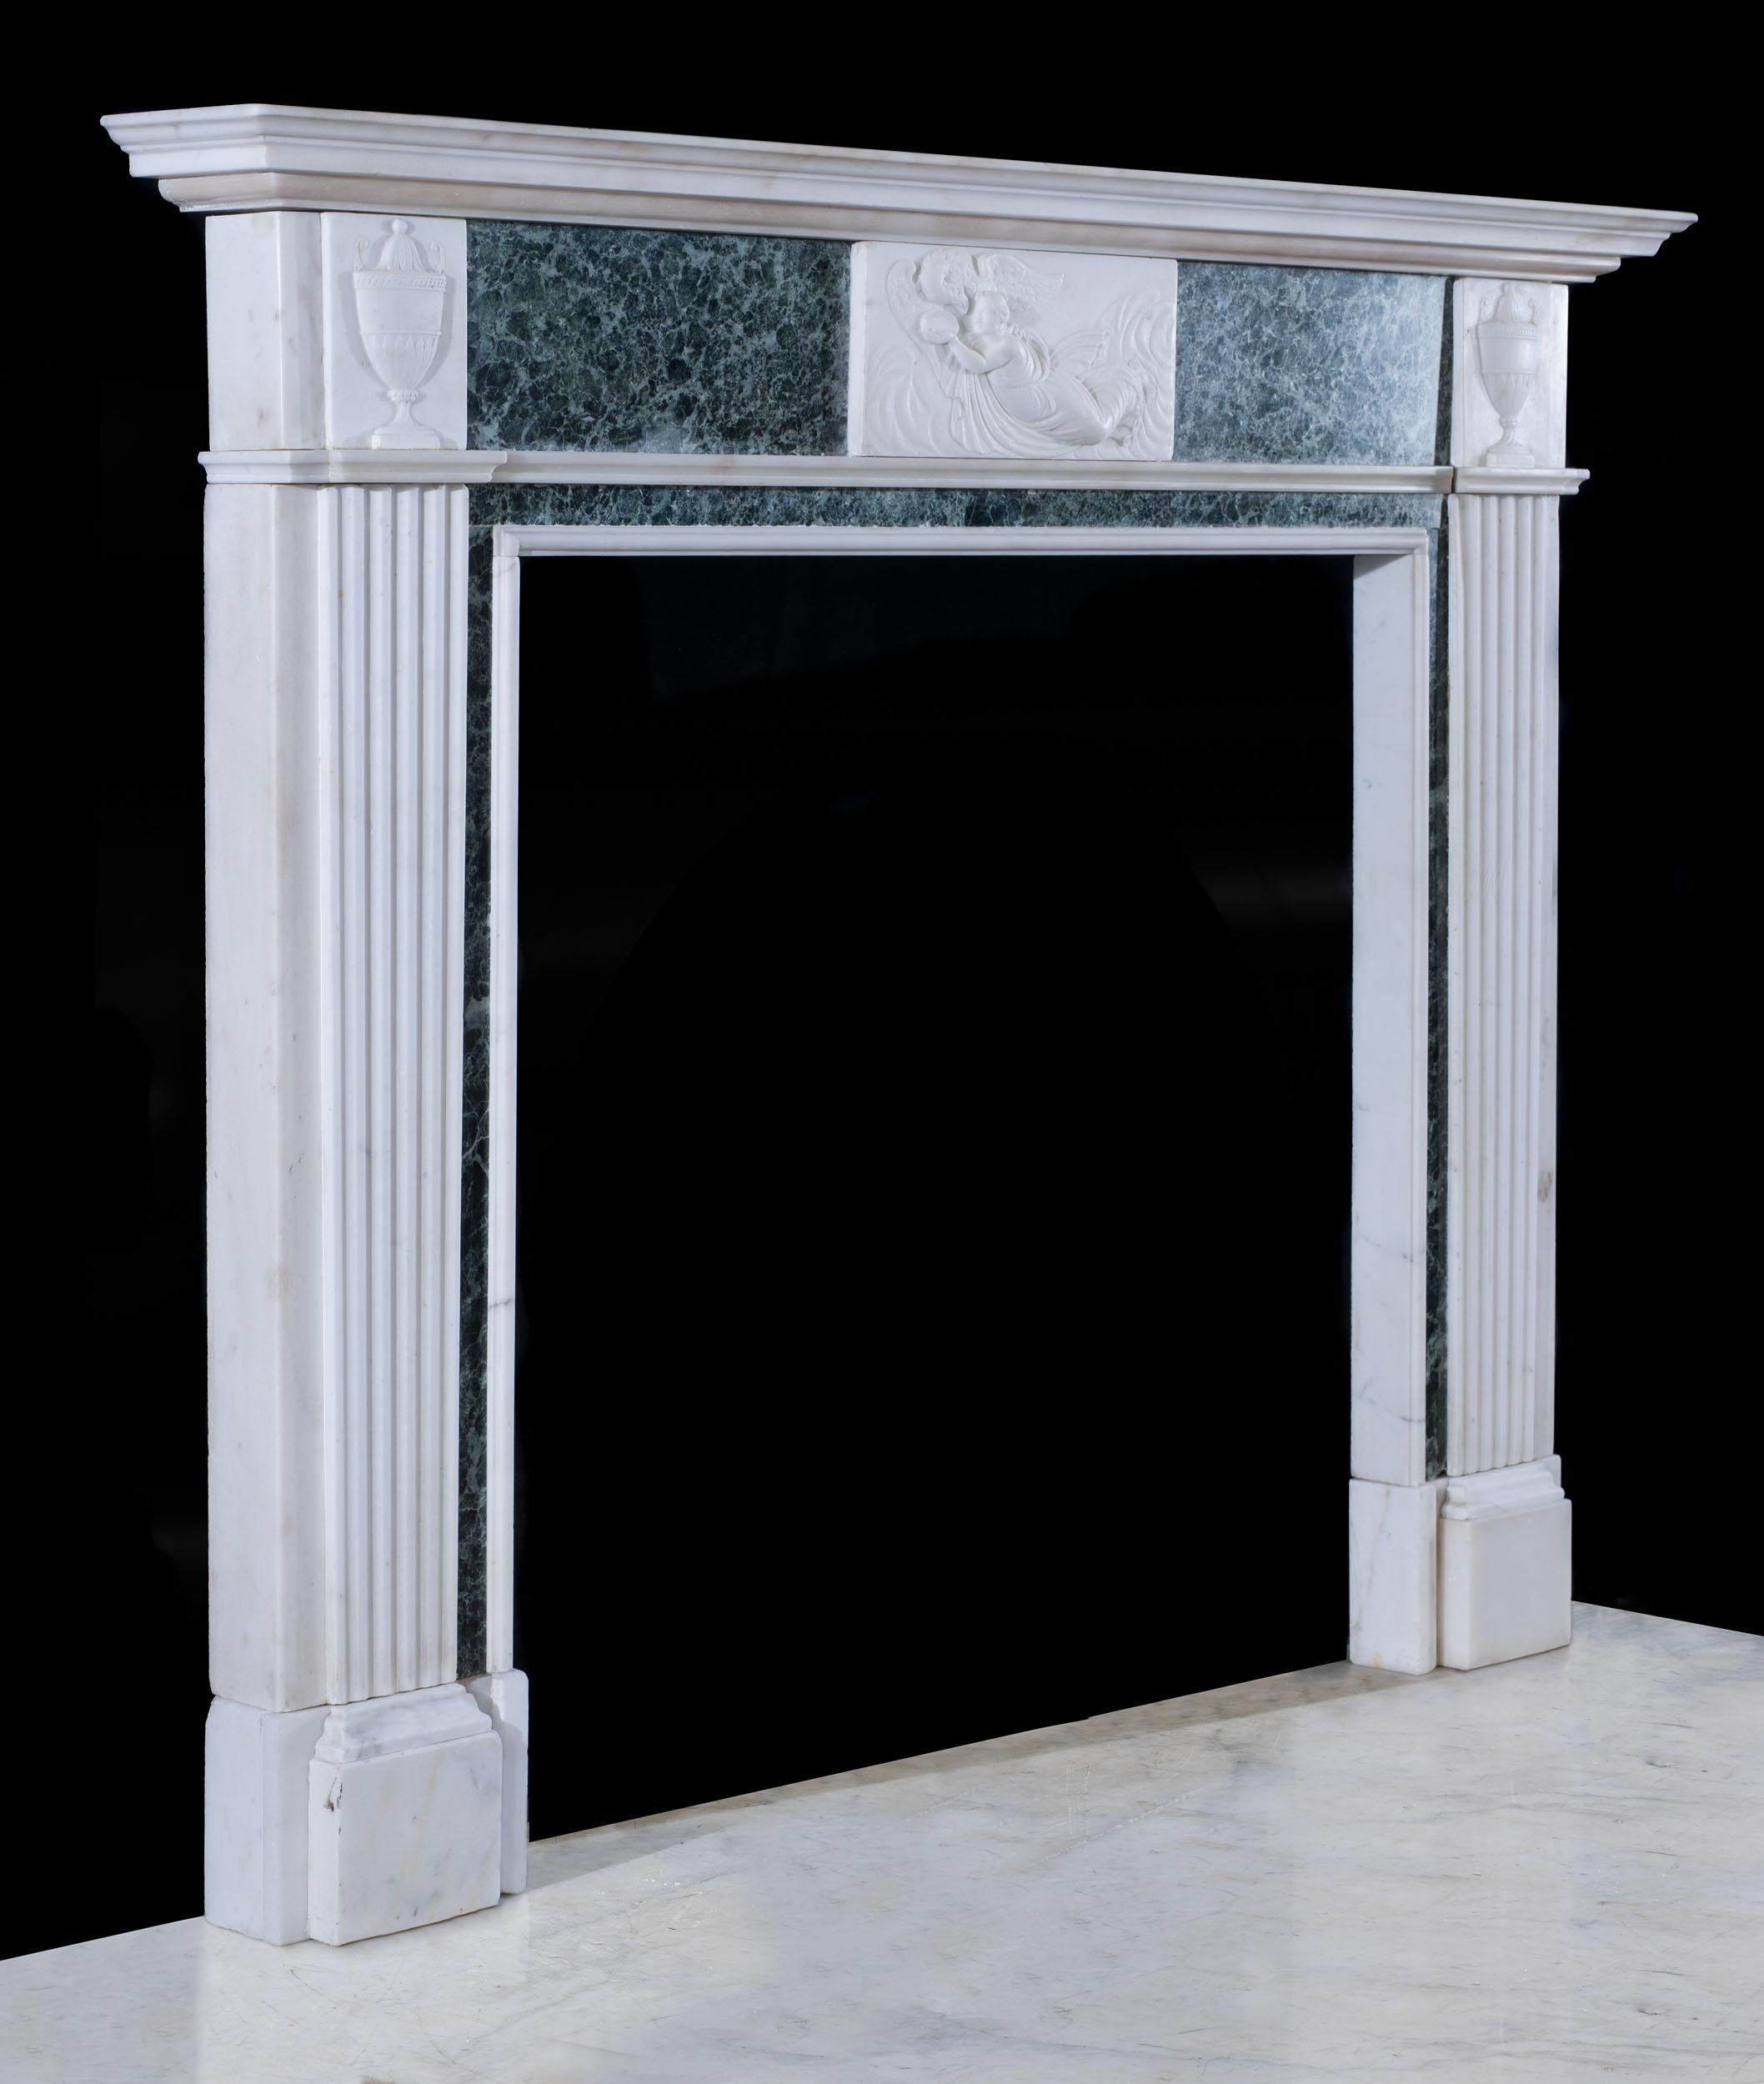 An antique neo-classical white statuary marble fireplace with Verde Antico ingrounds and frieze panels centred by a carved central tablet depicting Hebe in classical robes feeding Jupiter in the form of an eagle among clouds. This is flanked by a